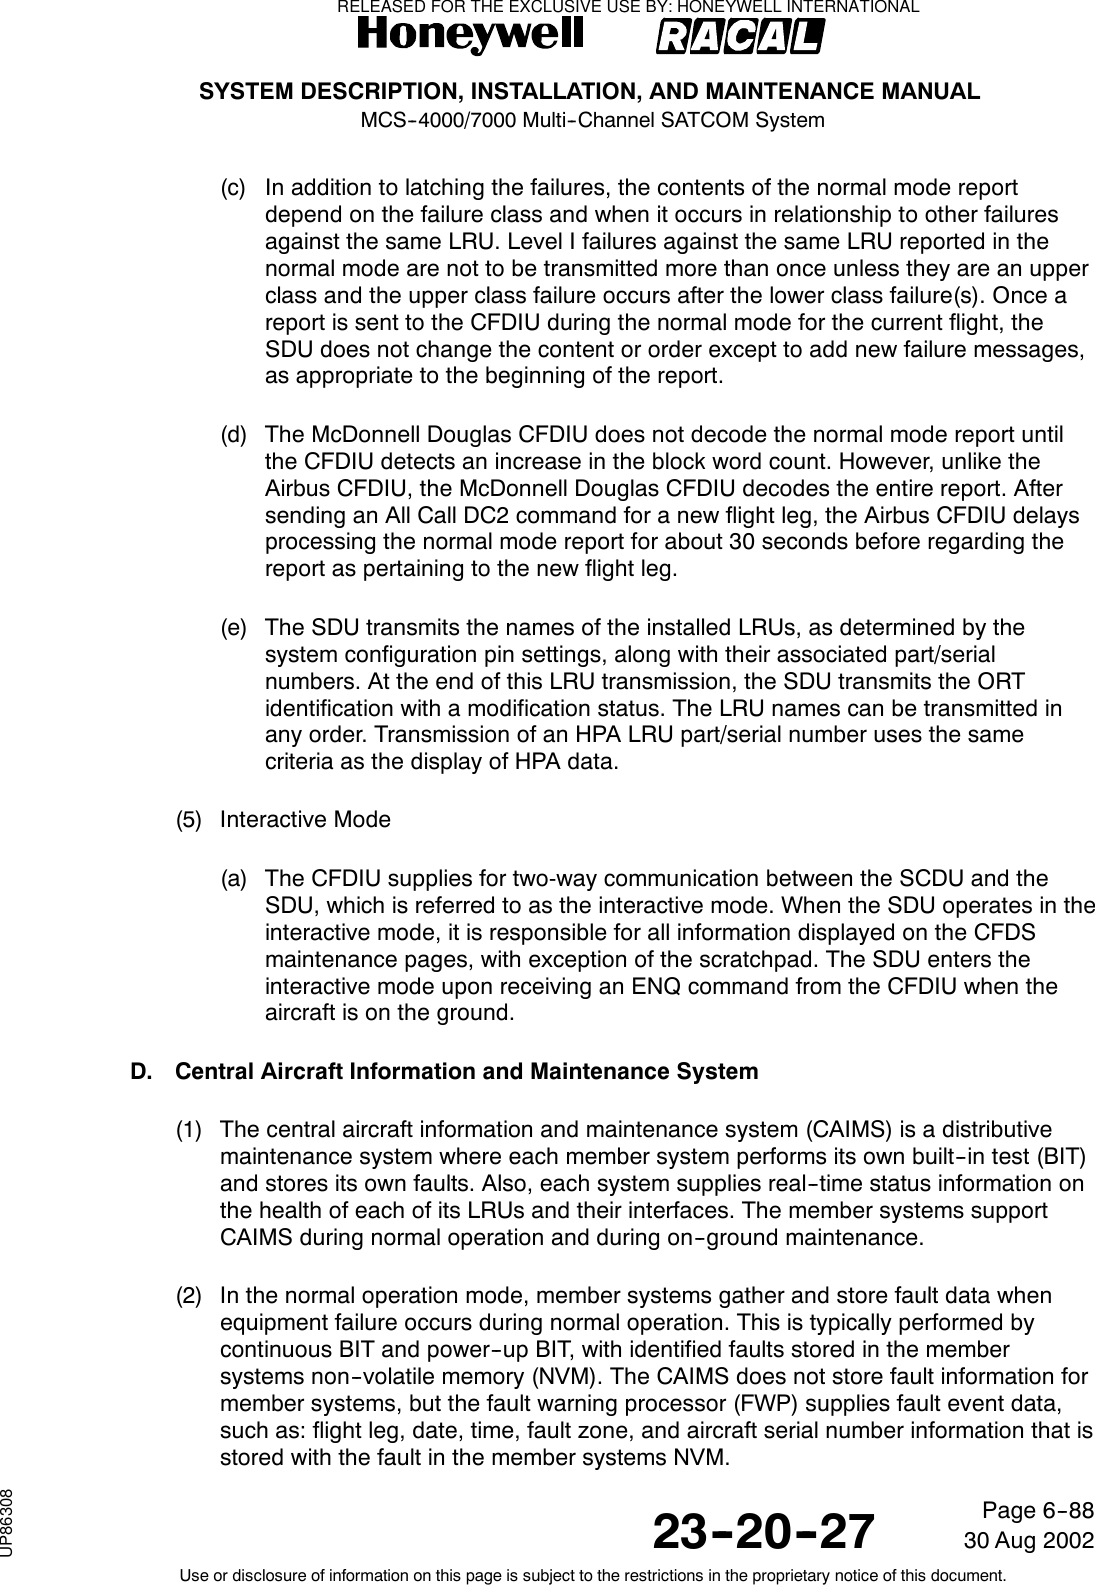 SYSTEM DESCRIPTION, INSTALLATION, AND MAINTENANCE MANUALMCS--4000/7000 Multi--Channel SATCOM System23--20--2730 Aug 2002Use or disclosure of information on this page is subject to the restrictions in the proprietary notice of this document.Page 6--88(c) In addition to latching the failures, the contents of the normal mode reportdepend on the failure class and when it occurs in relationship to other failuresagainst the same LRU. Level I failures against the same LRU reported in thenormal mode are not to be transmitted more than once unless they are an upperclass and the upper class failure occurs after the lower class failure(s). Once areport is sent to the CFDIU during the normal mode for the current flight, theSDU does not change the content or order except to add new failure messages,as appropriate to the beginning of the report.(d) The McDonnell Douglas CFDIU does not decode the normal mode report untilthe CFDIU detects an increase in the block word count. However, unlike theAirbus CFDIU, the McDonnell Douglas CFDIU decodes the entire report. Aftersending an All Call DC2 command for a new flight leg, the Airbus CFDIU delaysprocessing the normal mode report for about 30 seconds before regarding thereport as pertaining to the new flight leg.(e) The SDU transmits the names of the installed LRUs, as determined by thesystem configuration pin settings, along with their associated part/serialnumbers. At the end of this LRU transmission, the SDU transmits the ORTidentification with a modification status. The LRU names can be transmitted inany order. Transmission of an HPA LRU part/serial number uses the samecriteria as the display of HPA data.(5) Interactive Mode(a) The CFDIU supplies for two-way communication between the SCDU and theSDU, which is referred to as the interactive mode. When the SDU operates in theinteractive mode, it is responsible for all information displayed on the CFDSmaintenance pages, with exception of the scratchpad. The SDU enters theinteractive mode upon receiving an ENQ command from the CFDIU when theaircraft is on the ground.D. Central Aircraft Information and Maintenance System(1) The central aircraft information and maintenance system (CAIMS) is a distributivemaintenance system where each member system performs its own built--in test (BIT)and stores its own faults. Also, each system supplies real--time status information onthe health of each of its LRUs and their interfaces. The member systems supportCAIMS during normal operation and during on--ground maintenance.(2) In the normal operation mode, member systems gather and store fault data whenequipment failure occurs during normal operation. This is typically performed bycontinuous BIT and power--up BIT, with identified faults stored in the membersystems non--volatile memory (NVM). The CAIMS does not store fault information formember systems, but the fault warning processor (FWP) supplies fault event data,such as: flight leg, date, time, fault zone, and aircraft serial number information that isstored with the fault in the member systems NVM.RELEASED FOR THE EXCLUSIVE USE BY: HONEYWELL INTERNATIONALUP86308